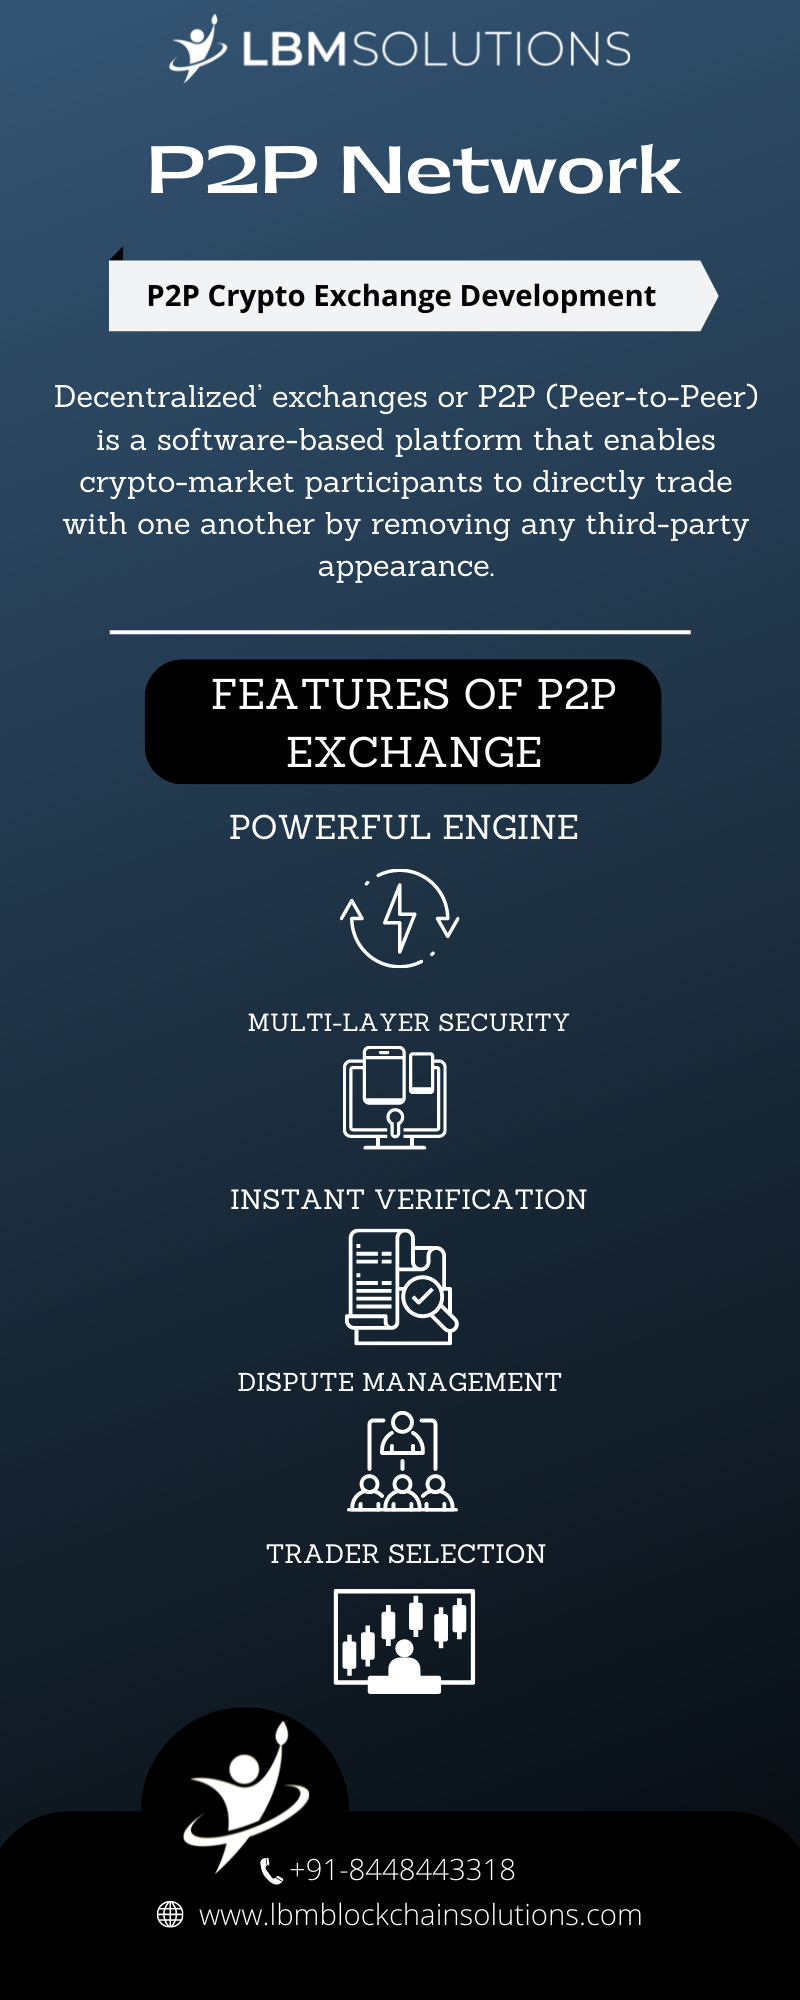 ¥ LBMSOLUTIONS

P2P Network

P2P Crypto Exchange Development

Decentralized’ exchanges or P2P (Peer-to-Peer)
is a software-based platform that enables
crypto-market participants to directly trade
with one another by removing any third-party
appearance.

FEATURES OF P2P
EXCHANGE

POWERFUL ENGINE

iO

MULTI-LAYER SECURITY

5

INSTANT VERIFICATION

 

DISPUTE MANAGEMENT

=)
PLL.

TRADER SELECTION